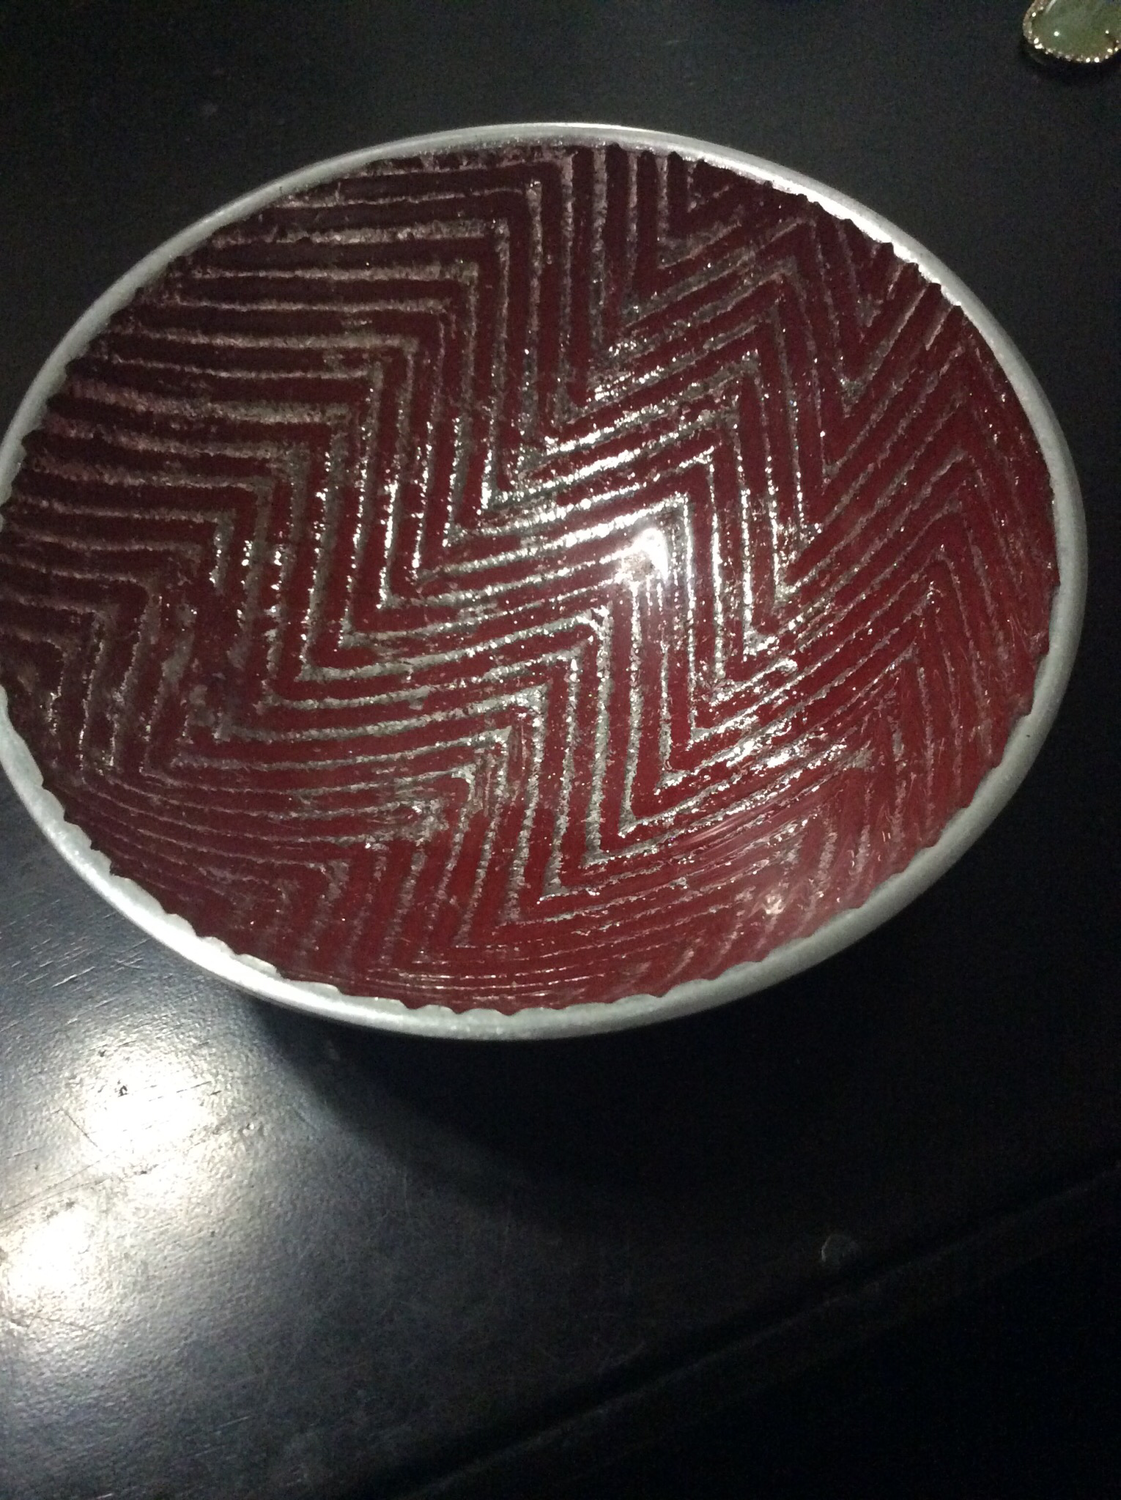 Small Aluminum bowl with red vibrant energy pattern energize atmosphere of thy Dwelling 